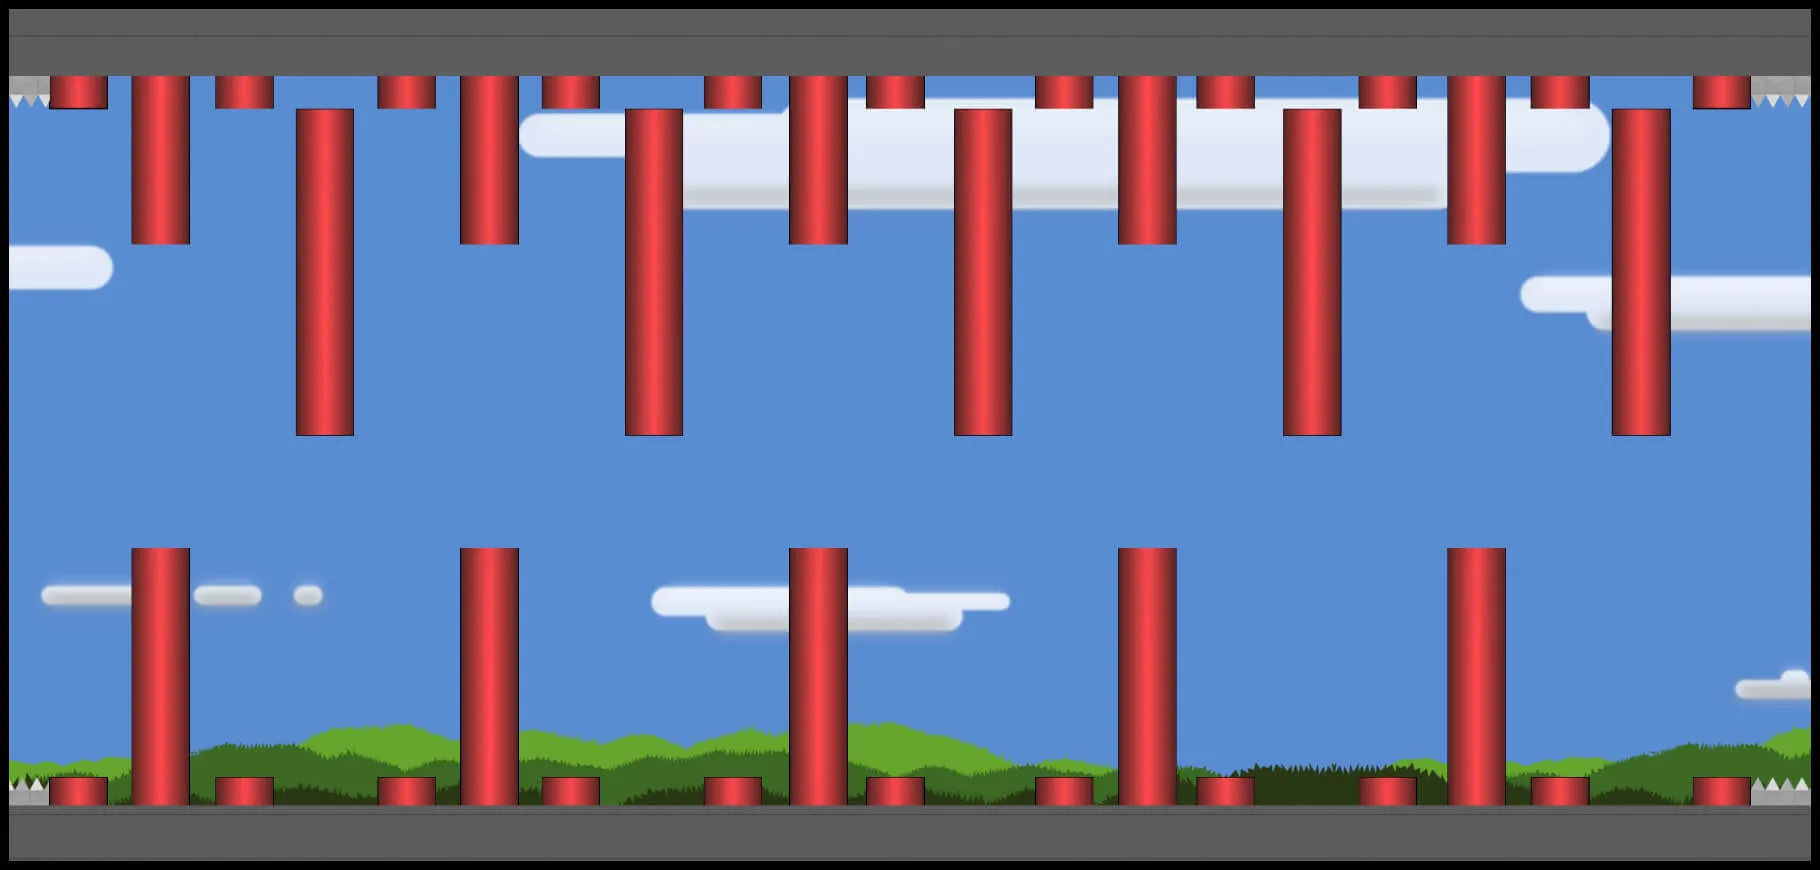 pipe delimited level screenshot from the game reflex runner.